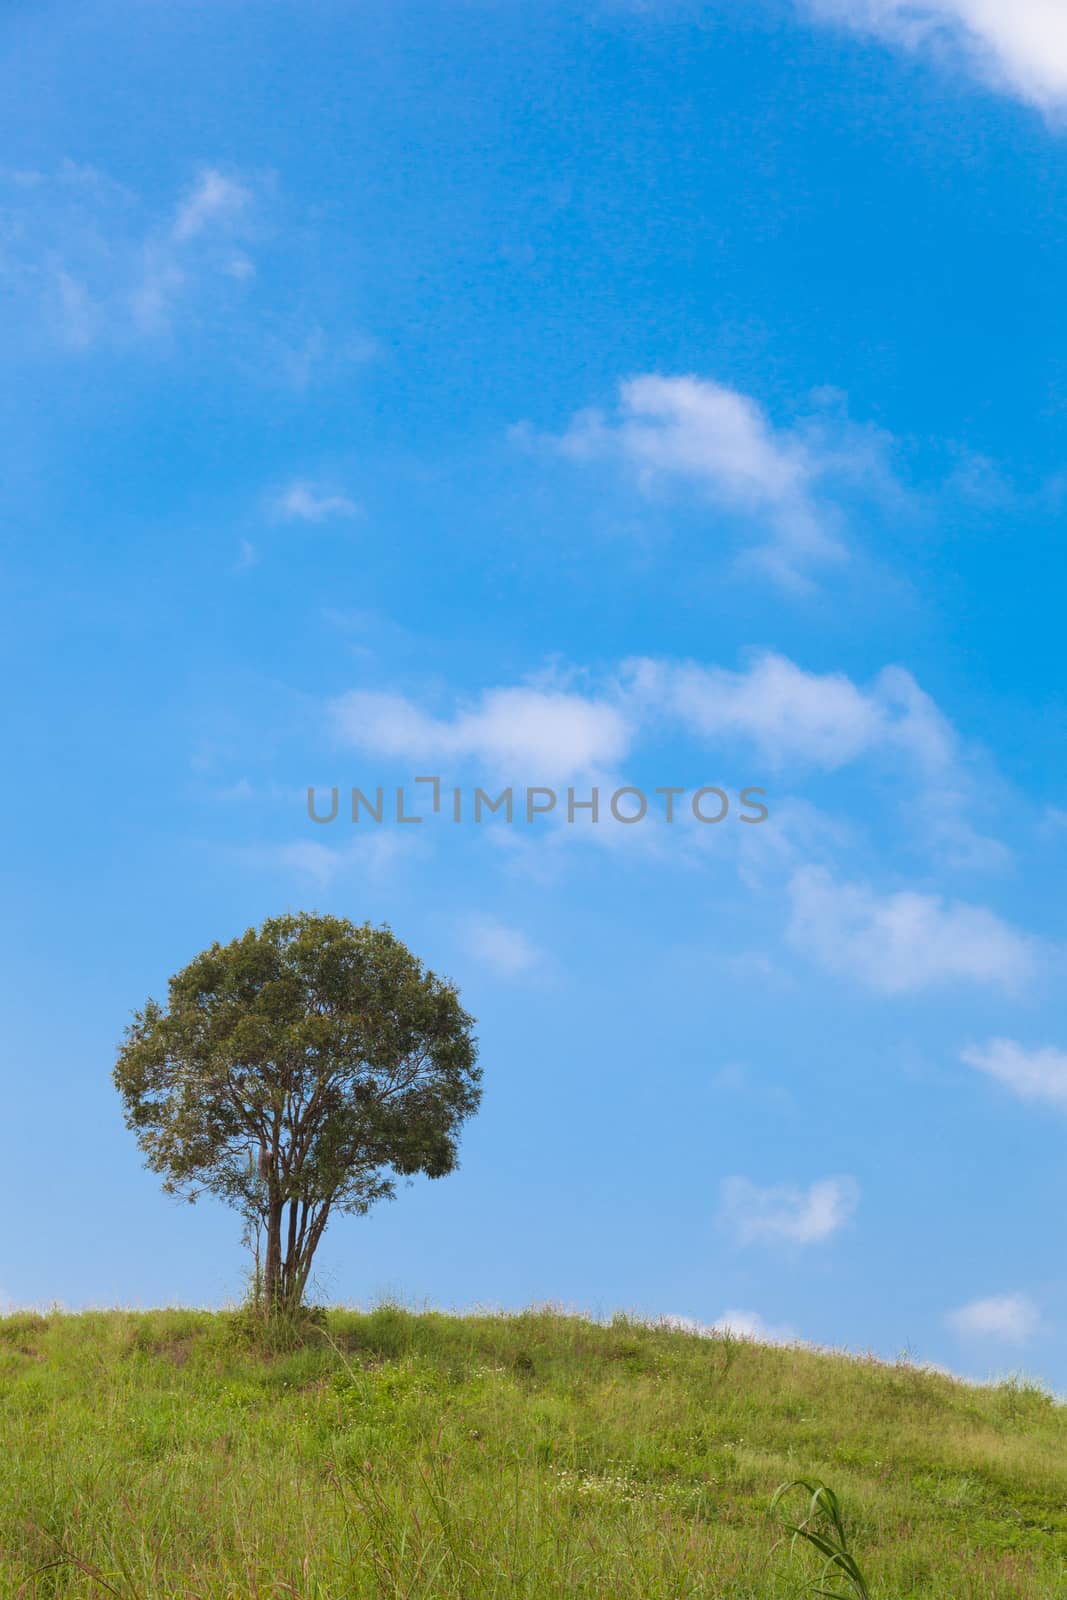 Big tree on a hillside. A large tree in the middle of pastures. Mostly clear skies